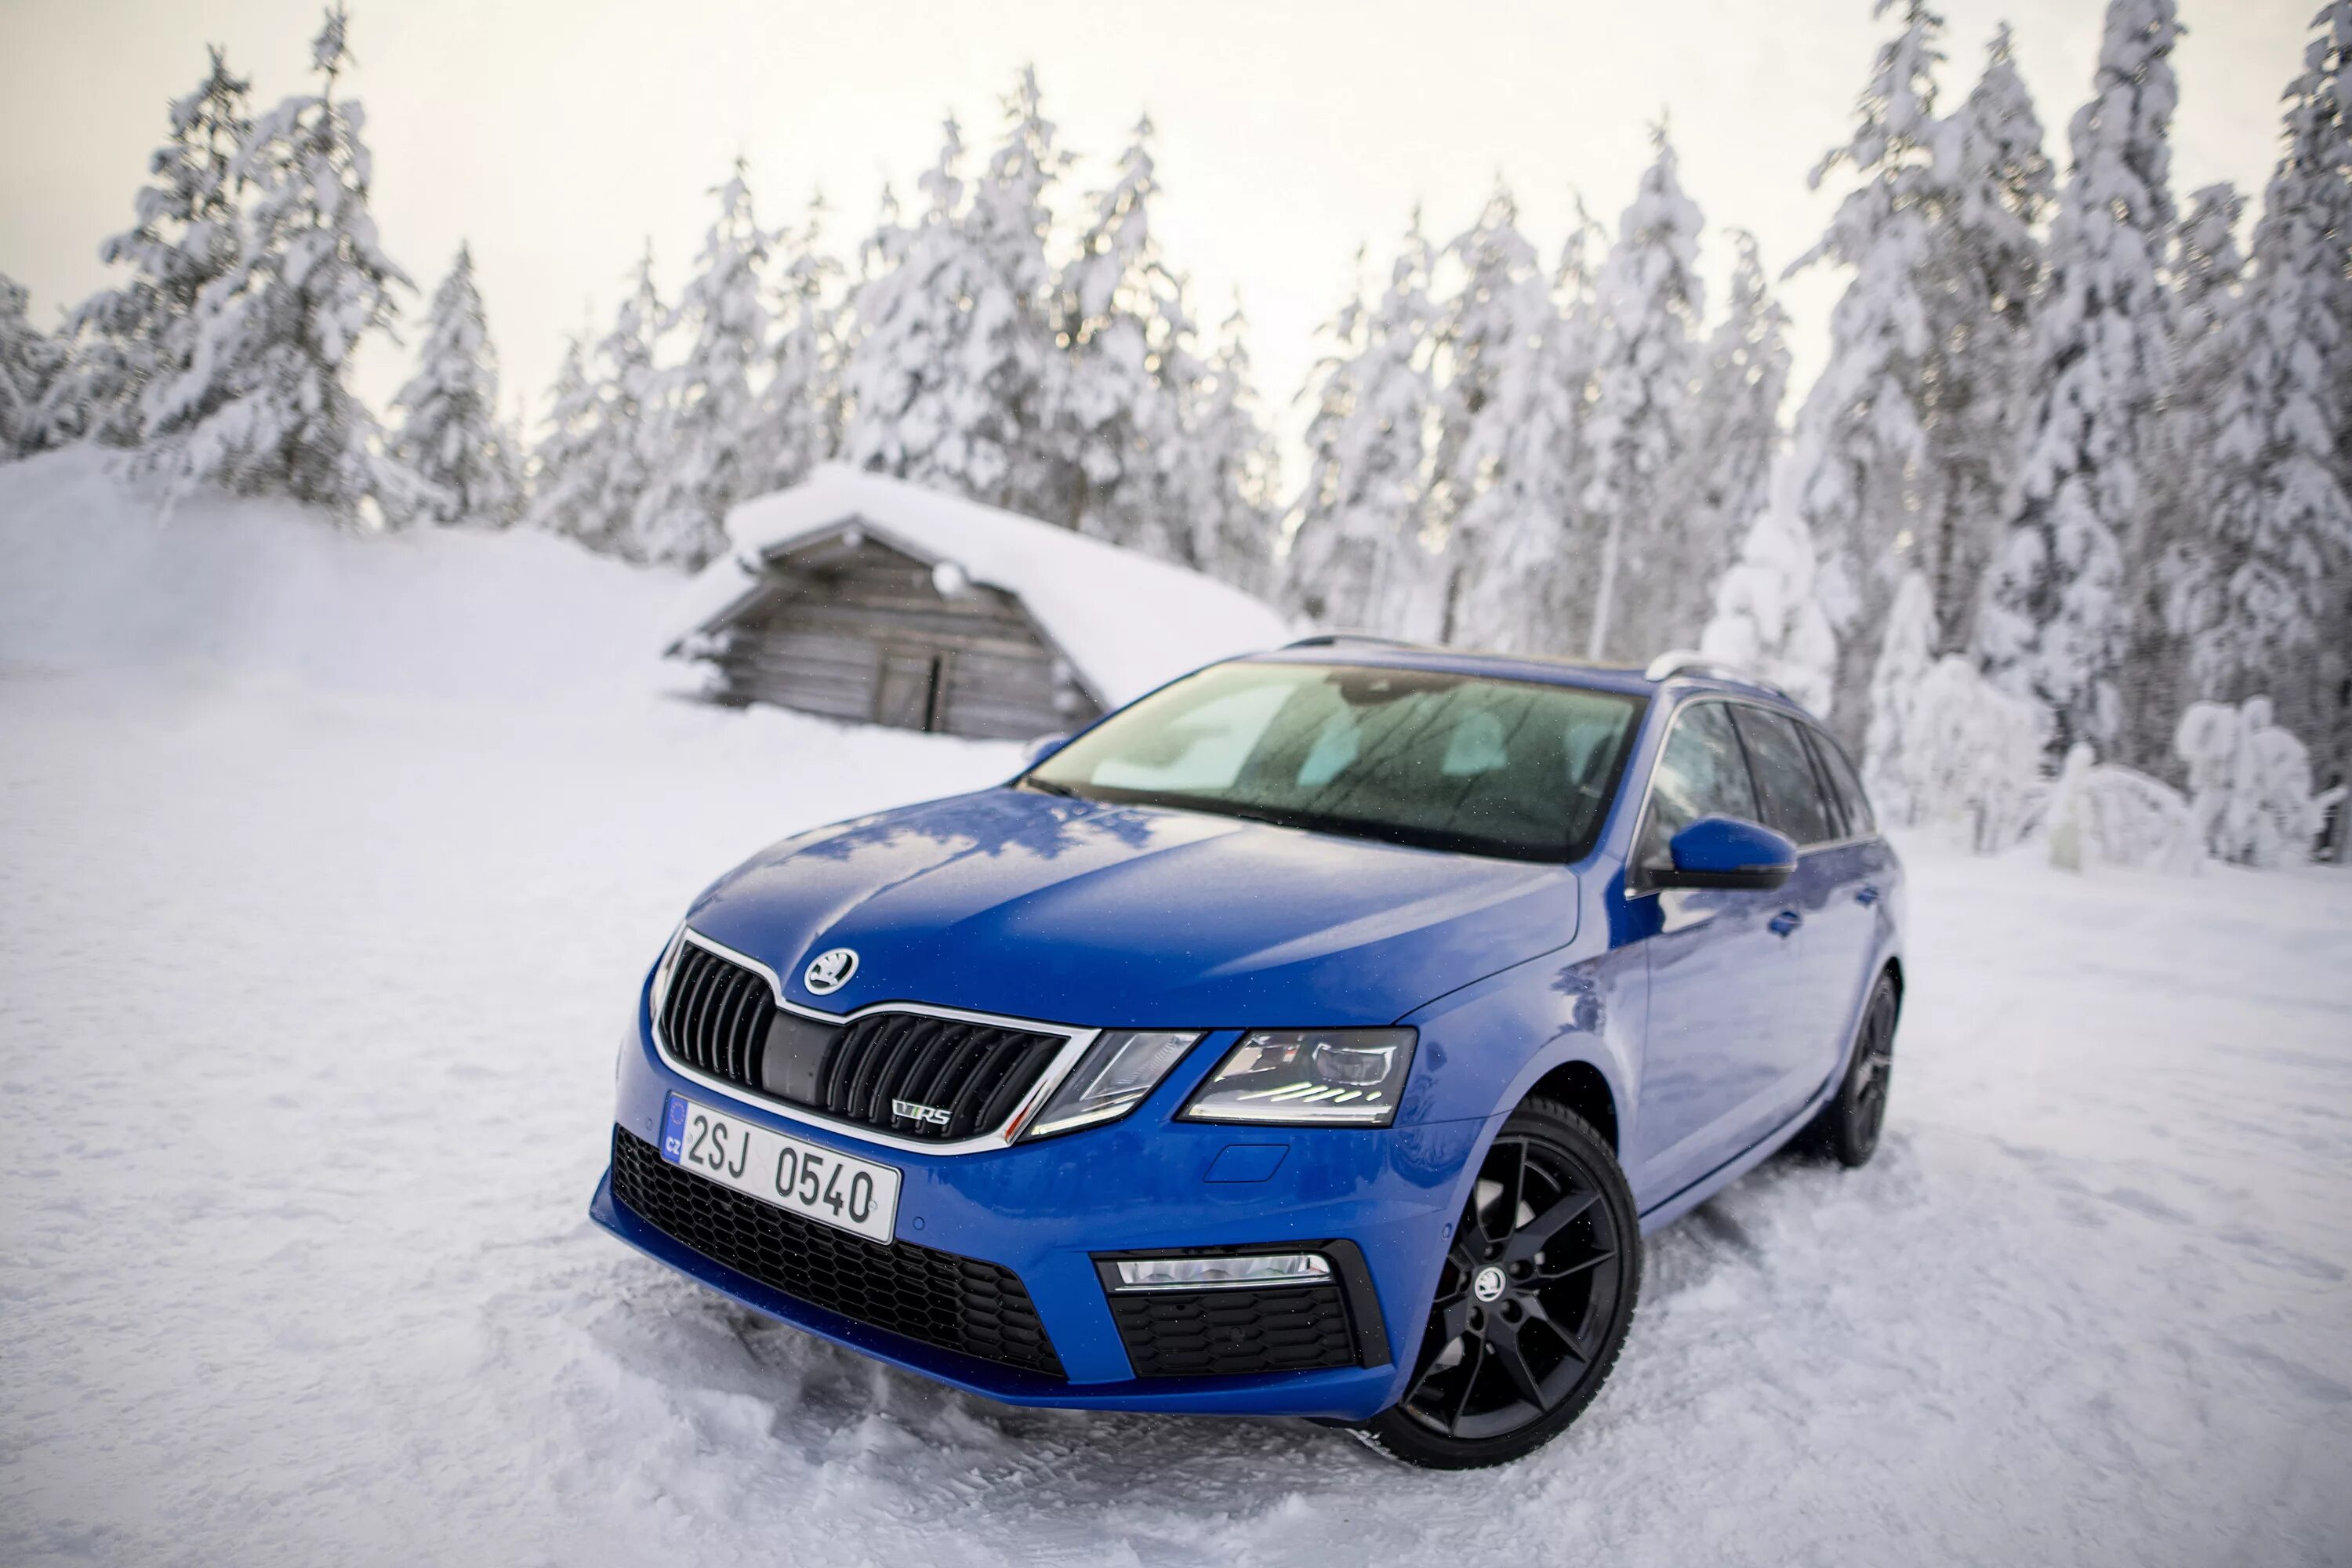 Skoda octavia rs 2019. Škoda Octavia RS 2019. Skoda Octavia a7 2019 RS.